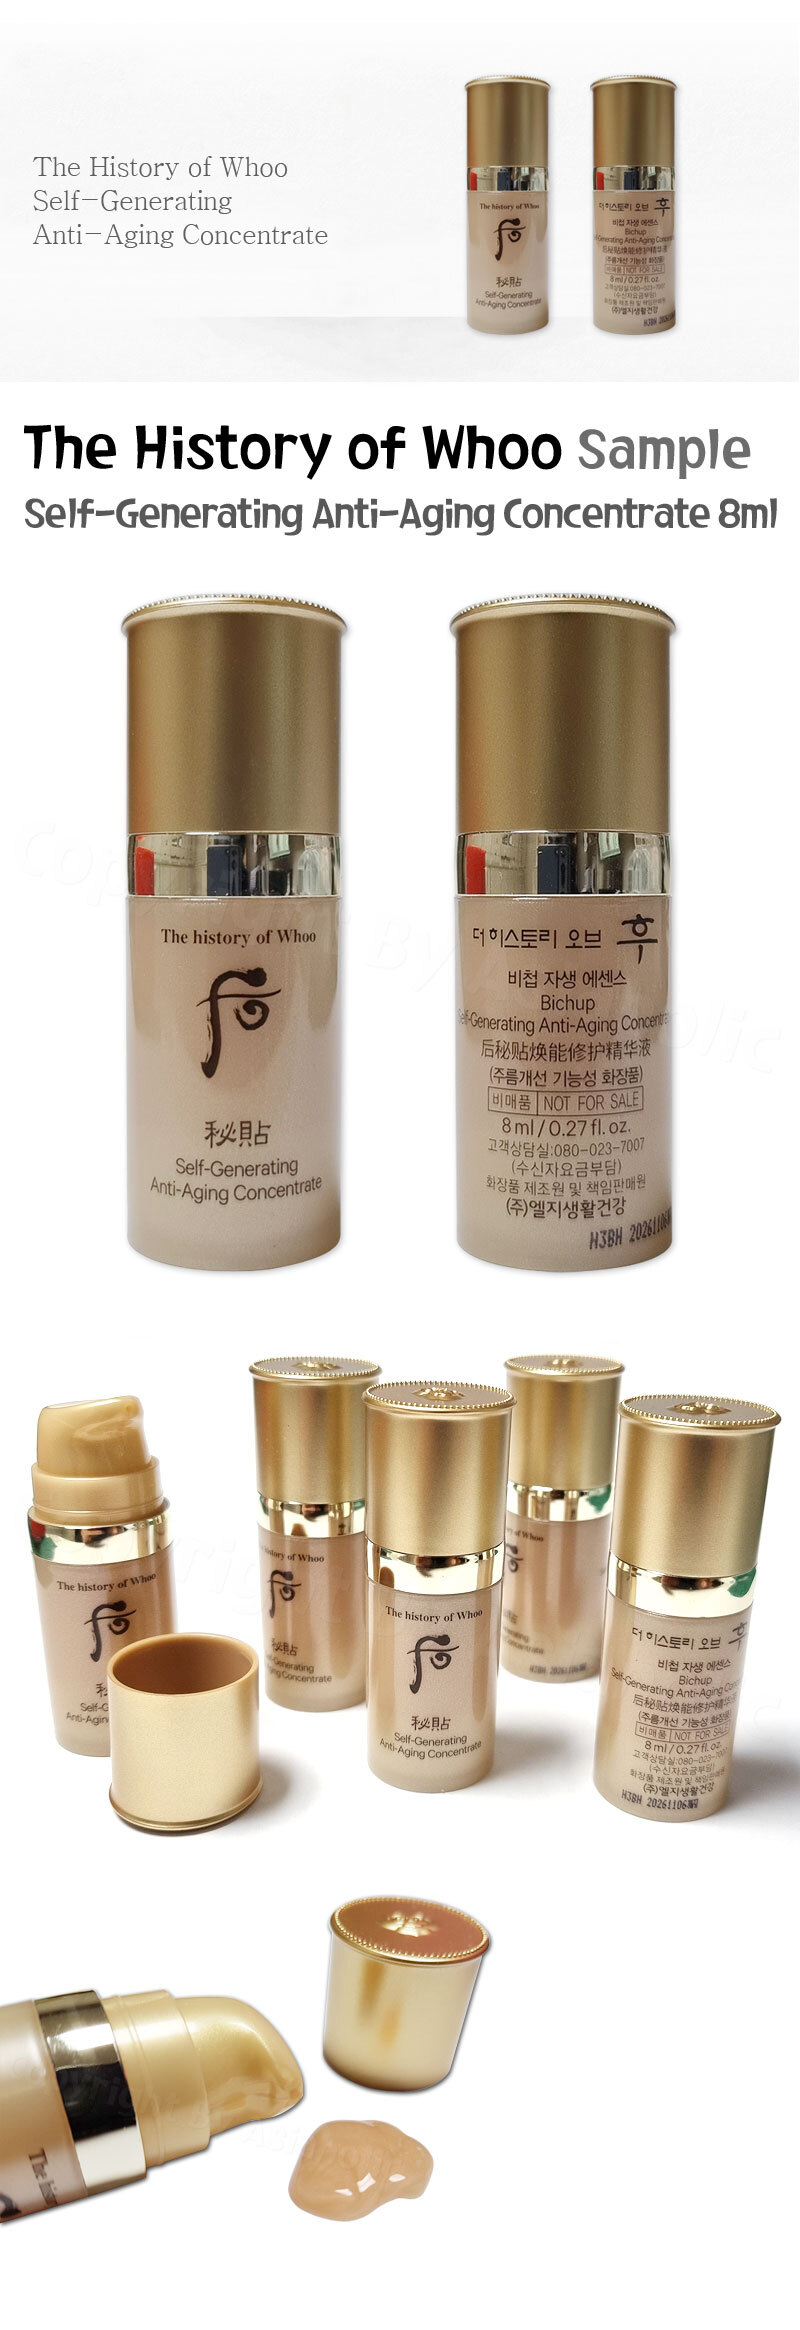 The history of Whoo Self-Generating Anti-Aging Concentrate 8ml (1pcs ~ 20pcs) Sample Newest Version